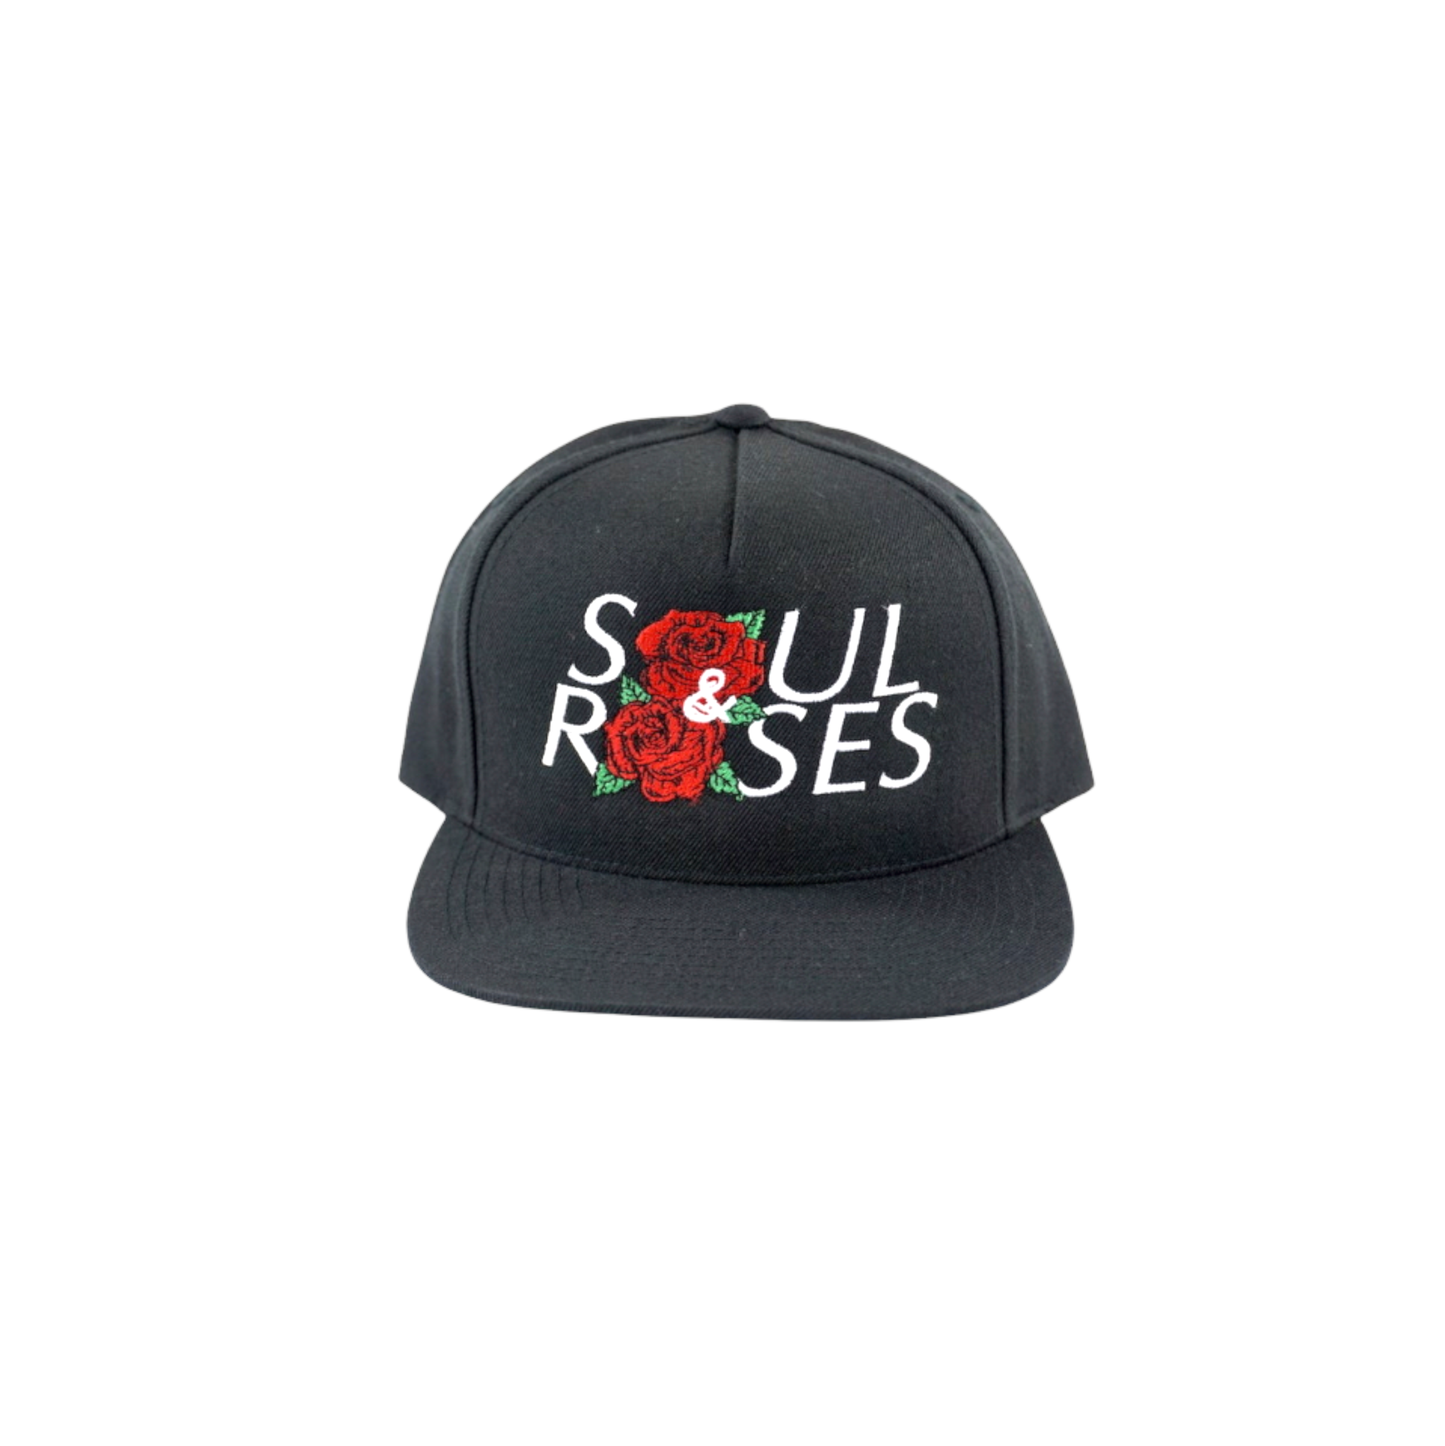 Two Roses Black Hat